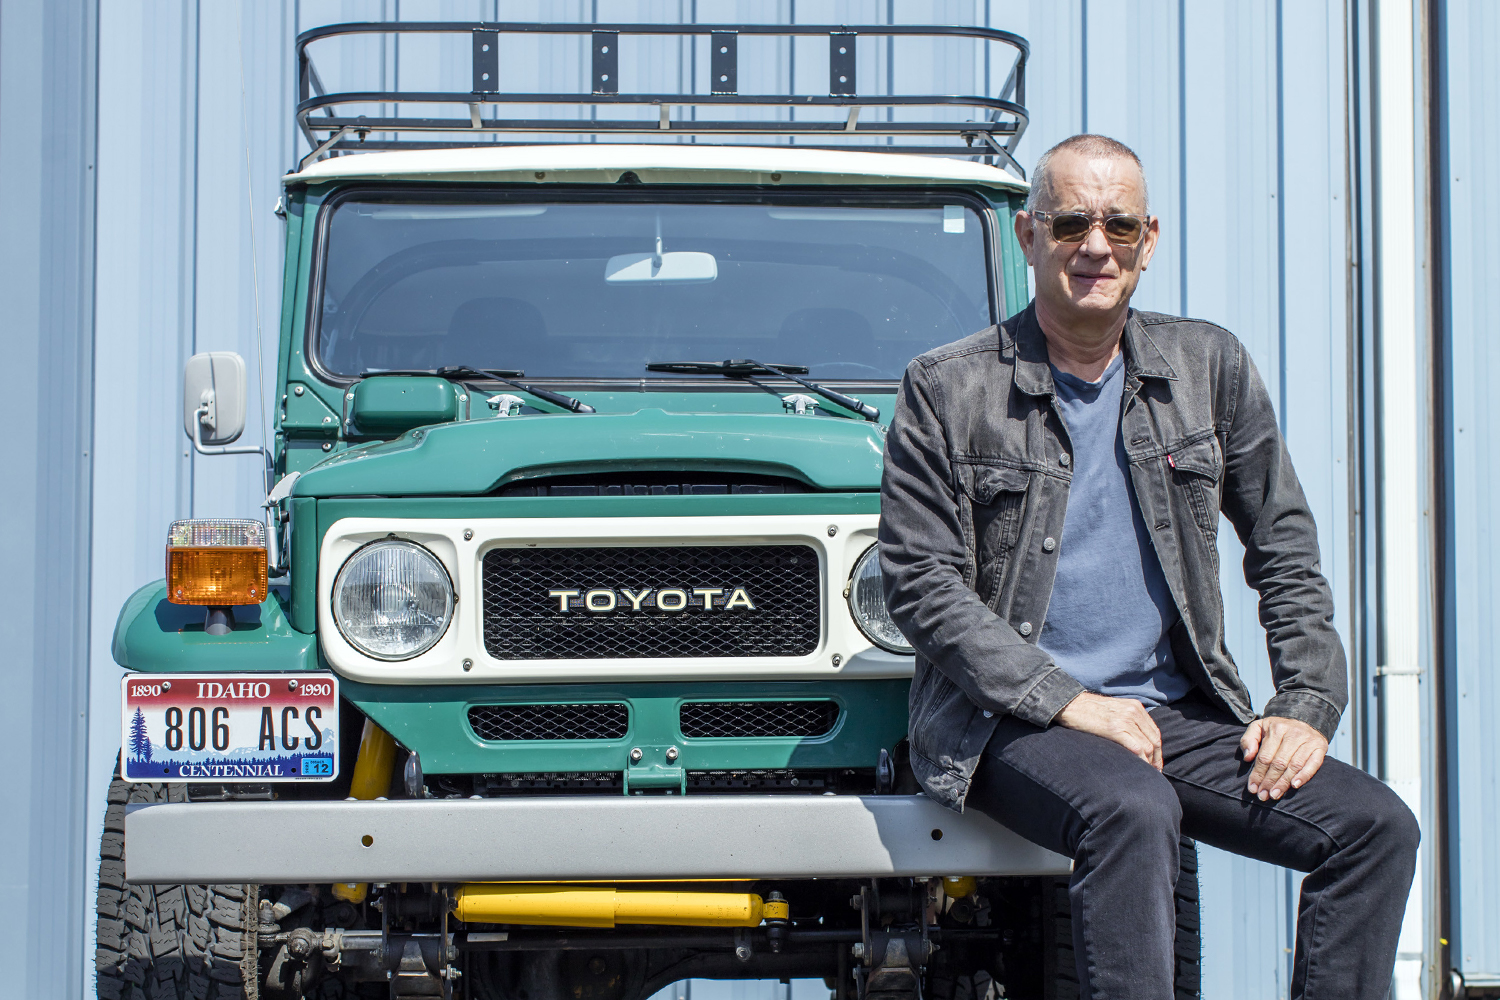 Tom Hanks Built a Perfectly Balanced Car Collection. Now He’s Selling It.